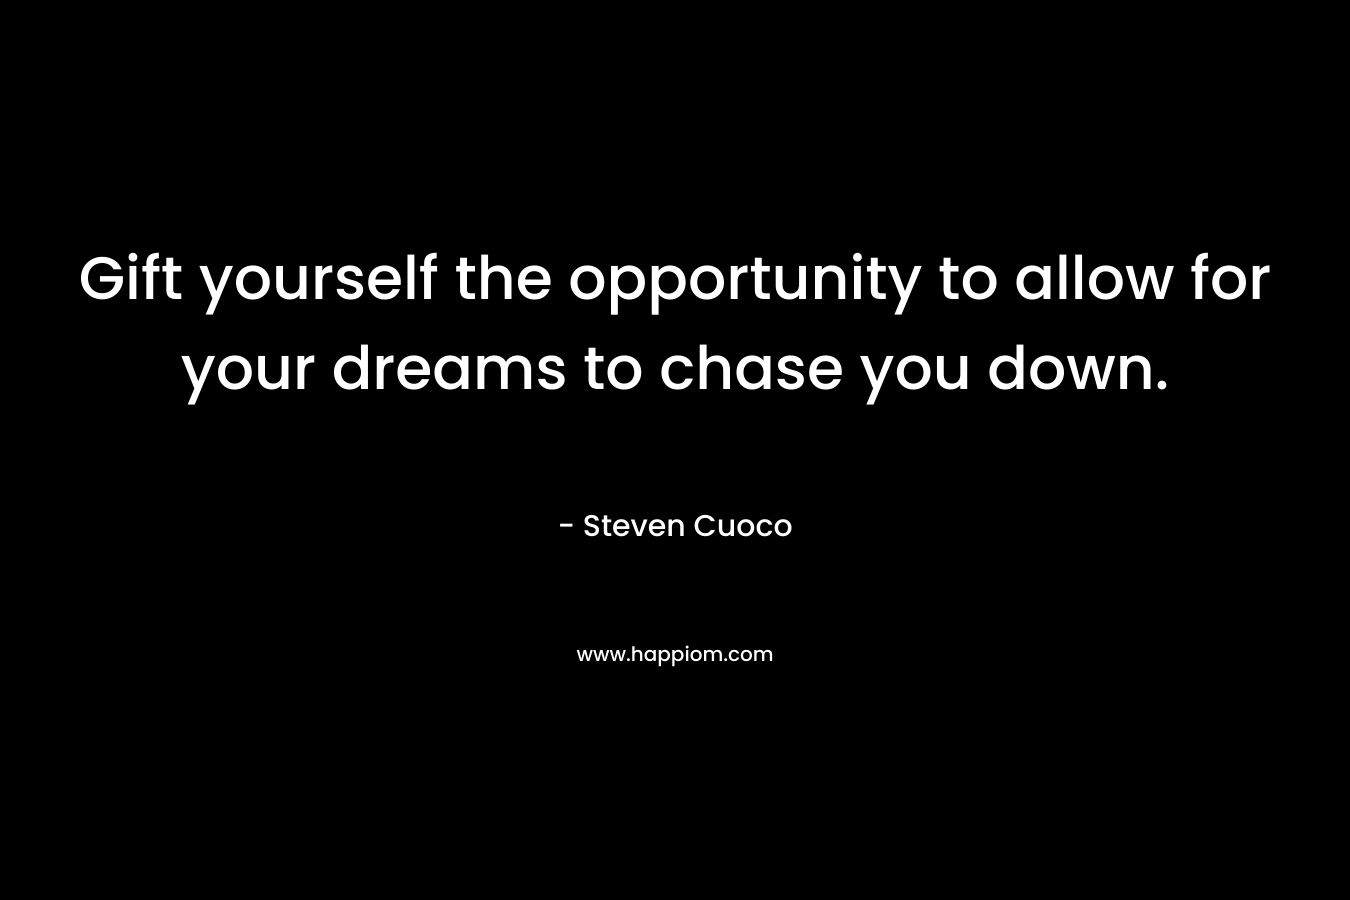 Gift yourself the opportunity to allow for your dreams to chase you down. – Steven Cuoco